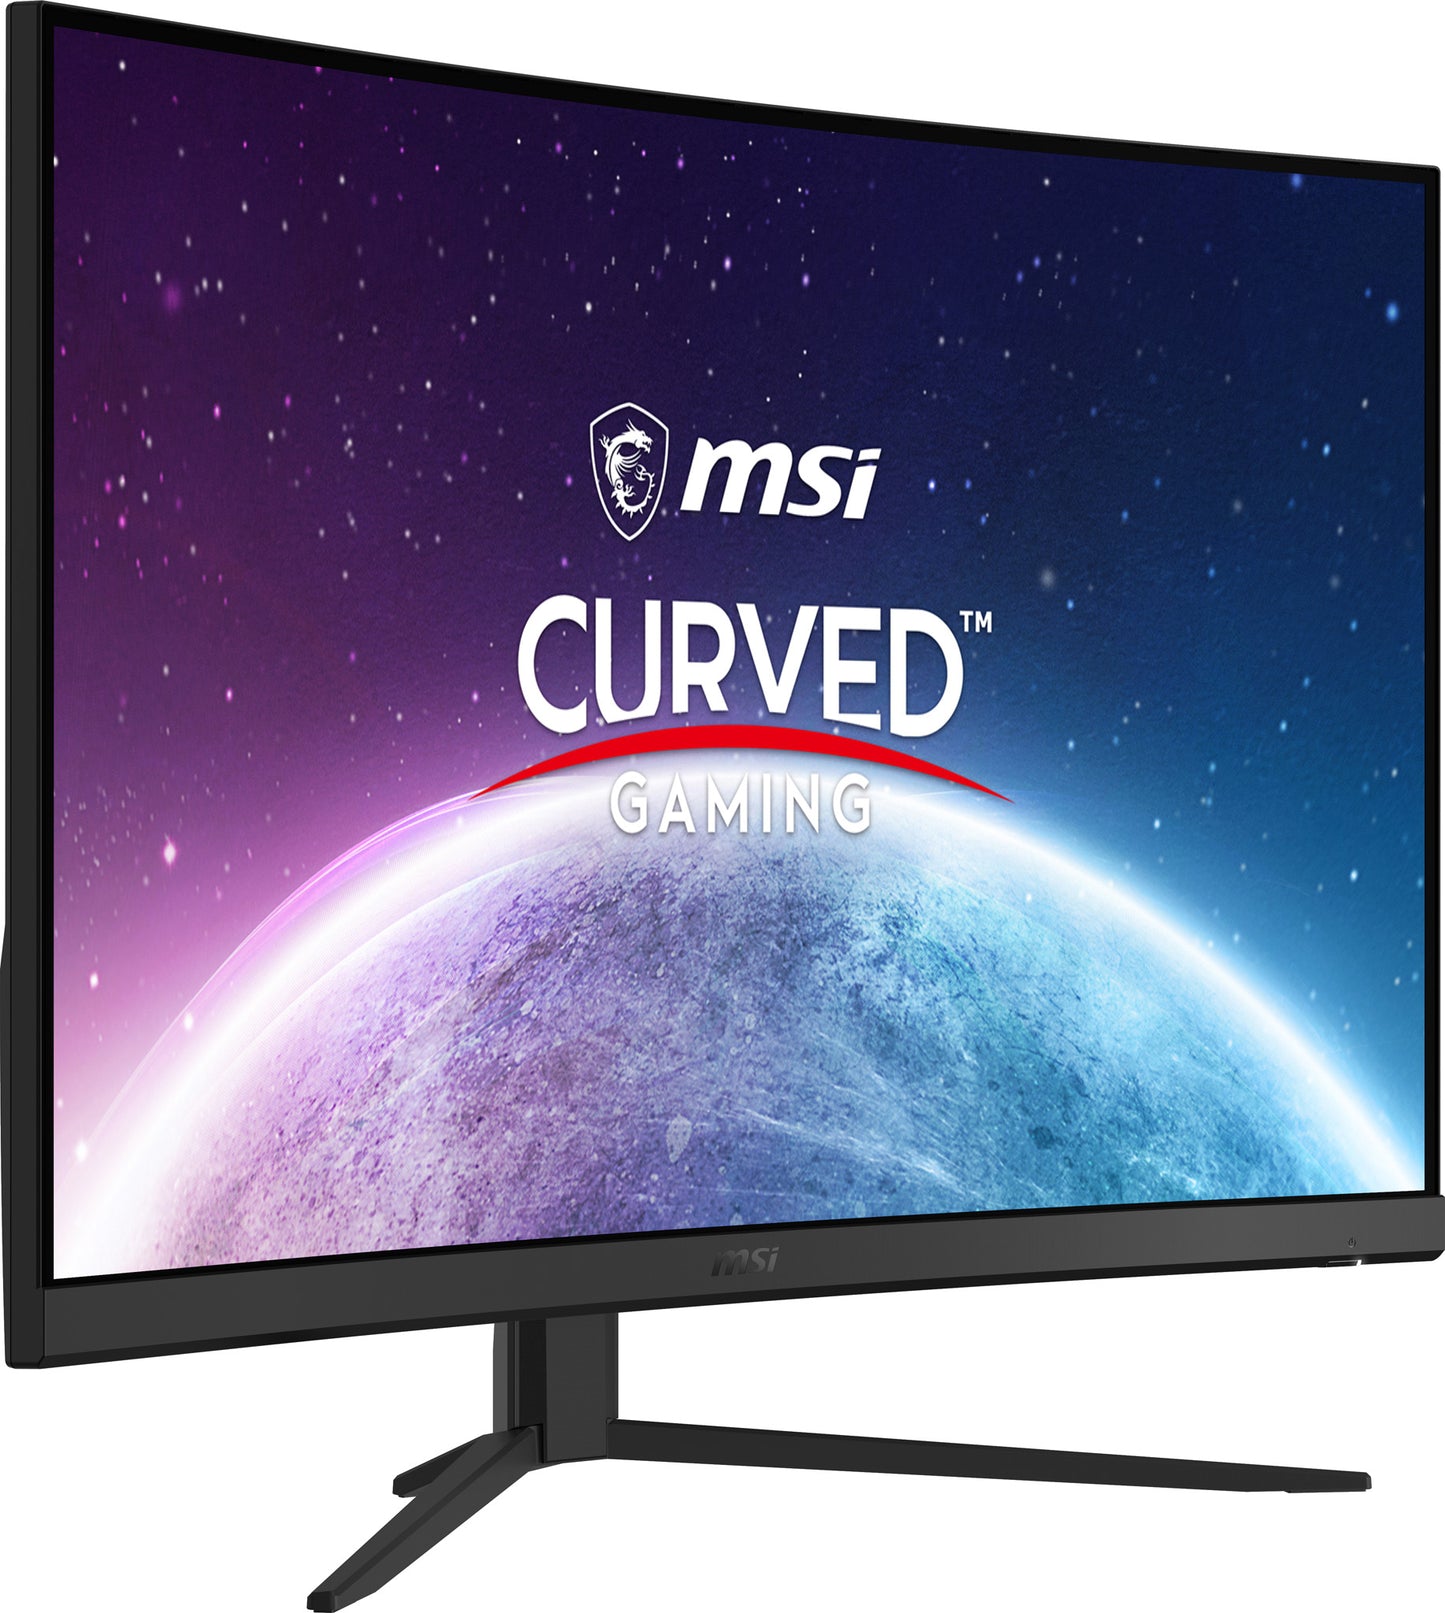 MSI MONITOR G32C4X CURVED GAMING MNTR